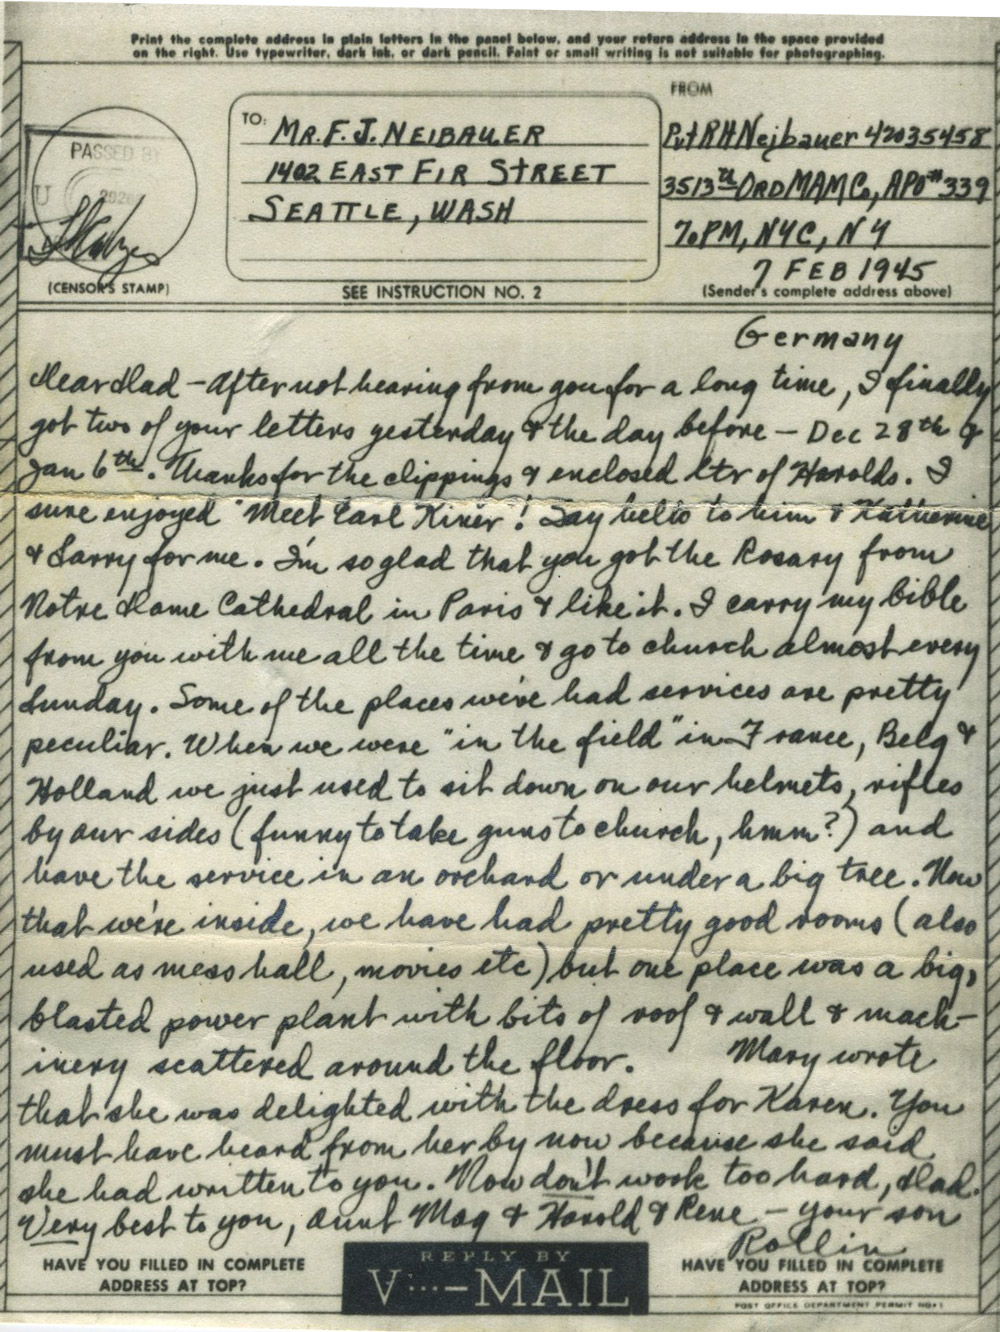 tofr2-7-45-ww2-letters-mary-anne-erickson